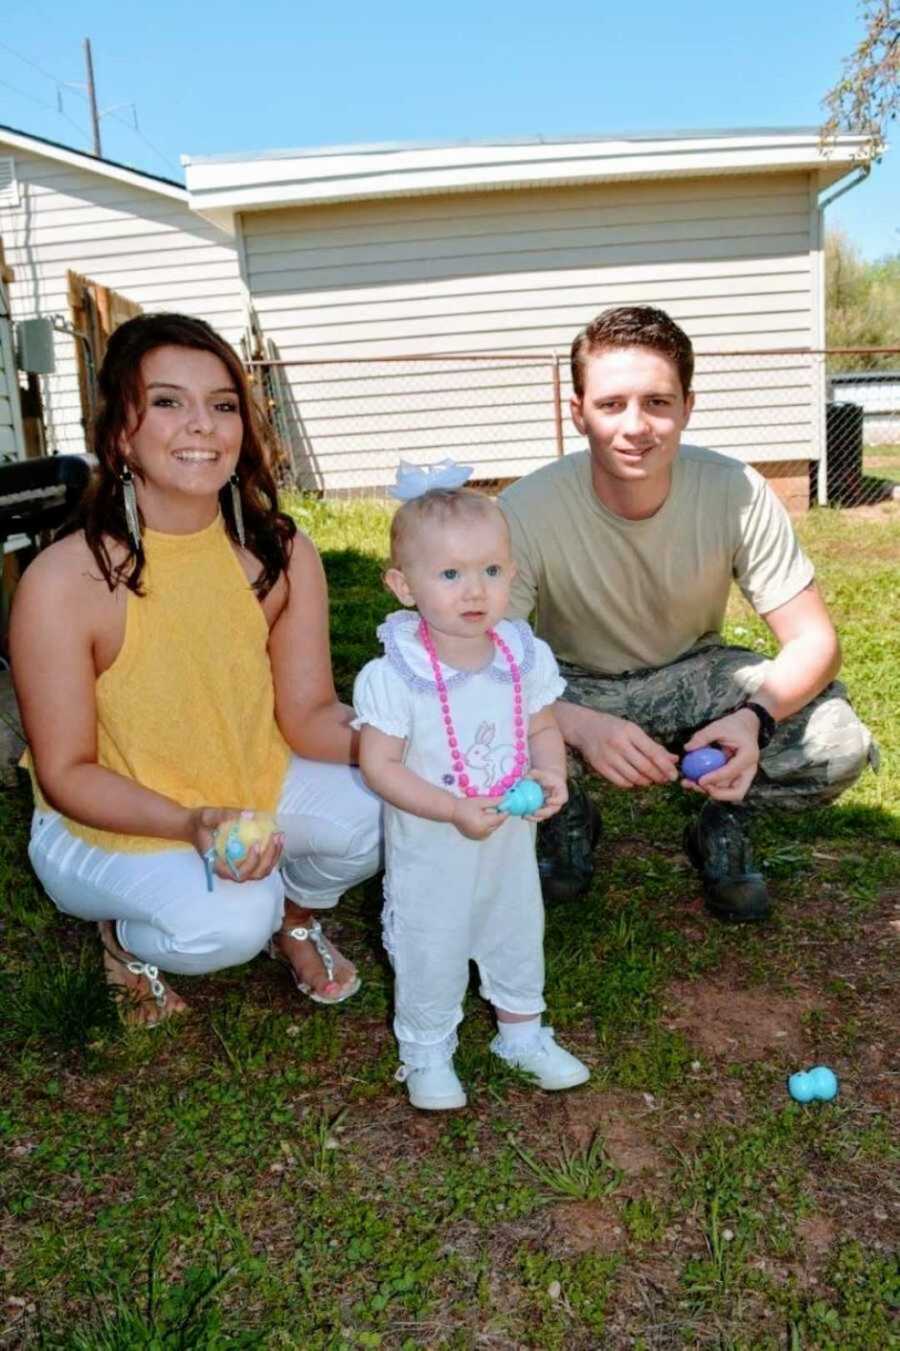 Young parents squatting next to toddler daughter on grass